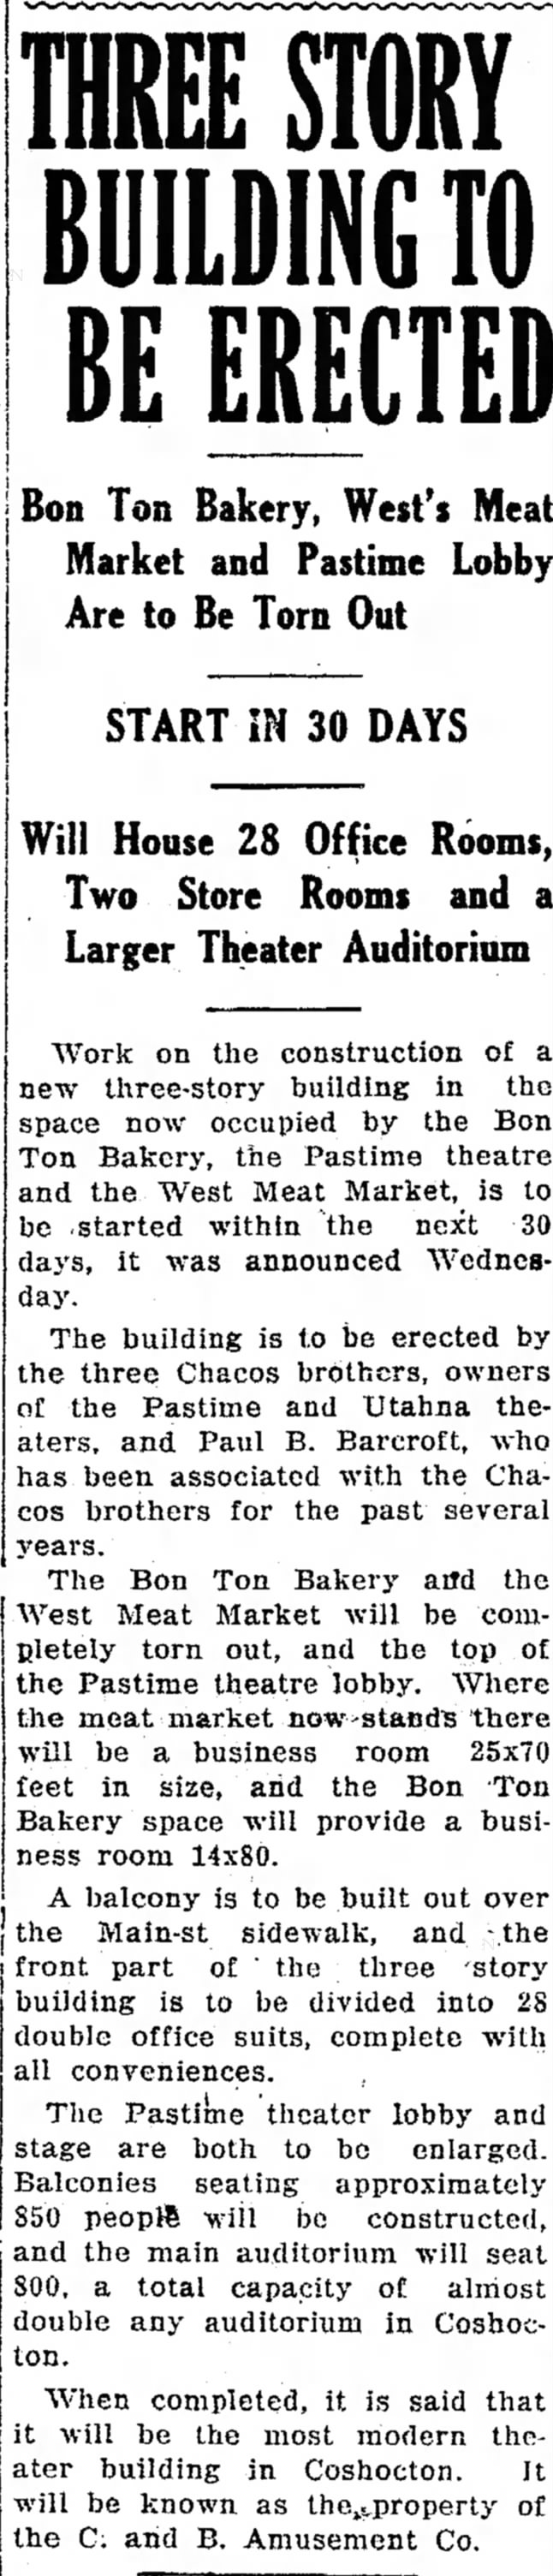 Three Story Building to be Ereted
May 21, 1924